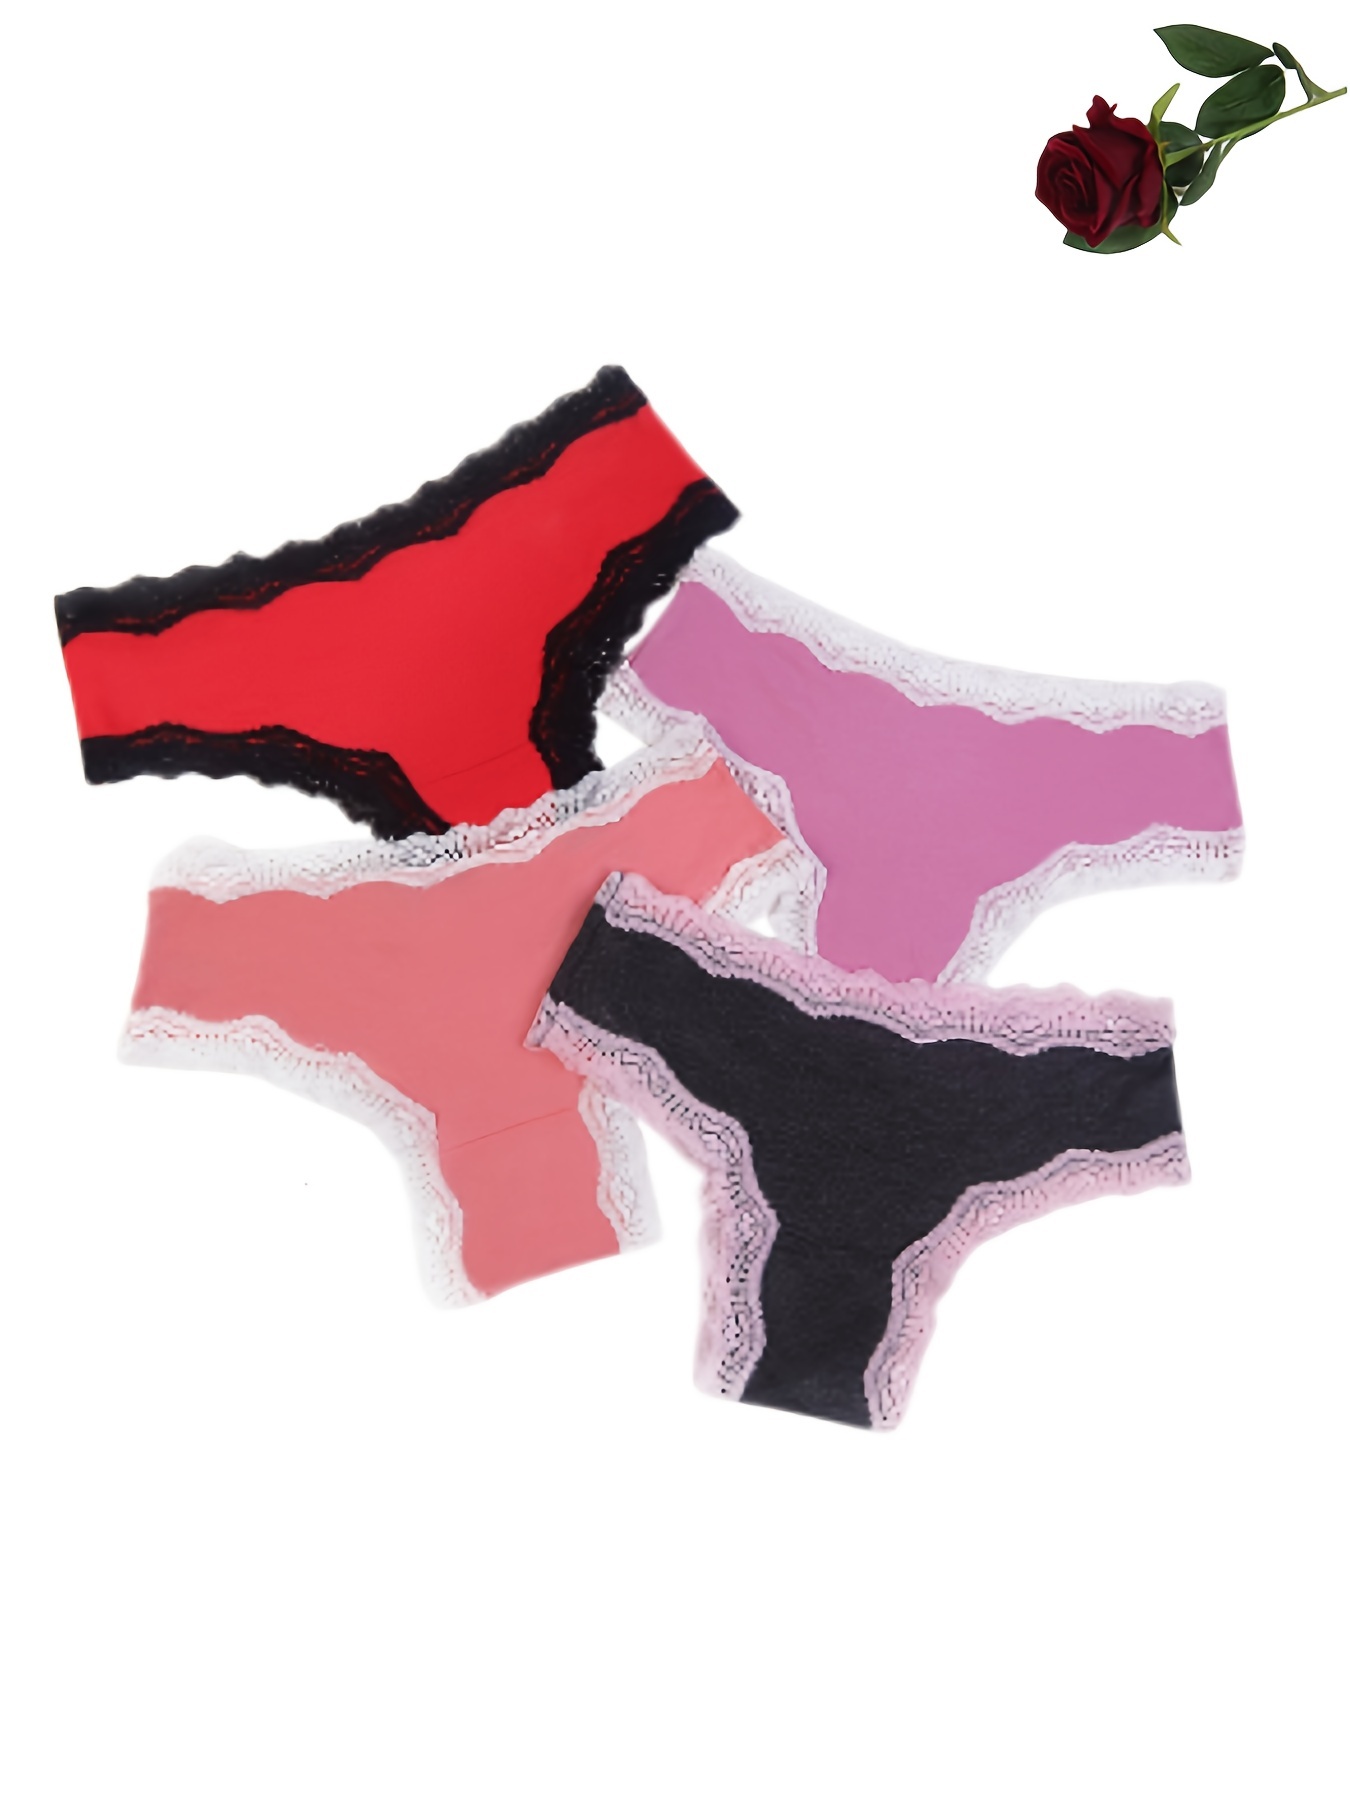 Funny Sexy Underwear Shop - High-quality & Affordable - Great